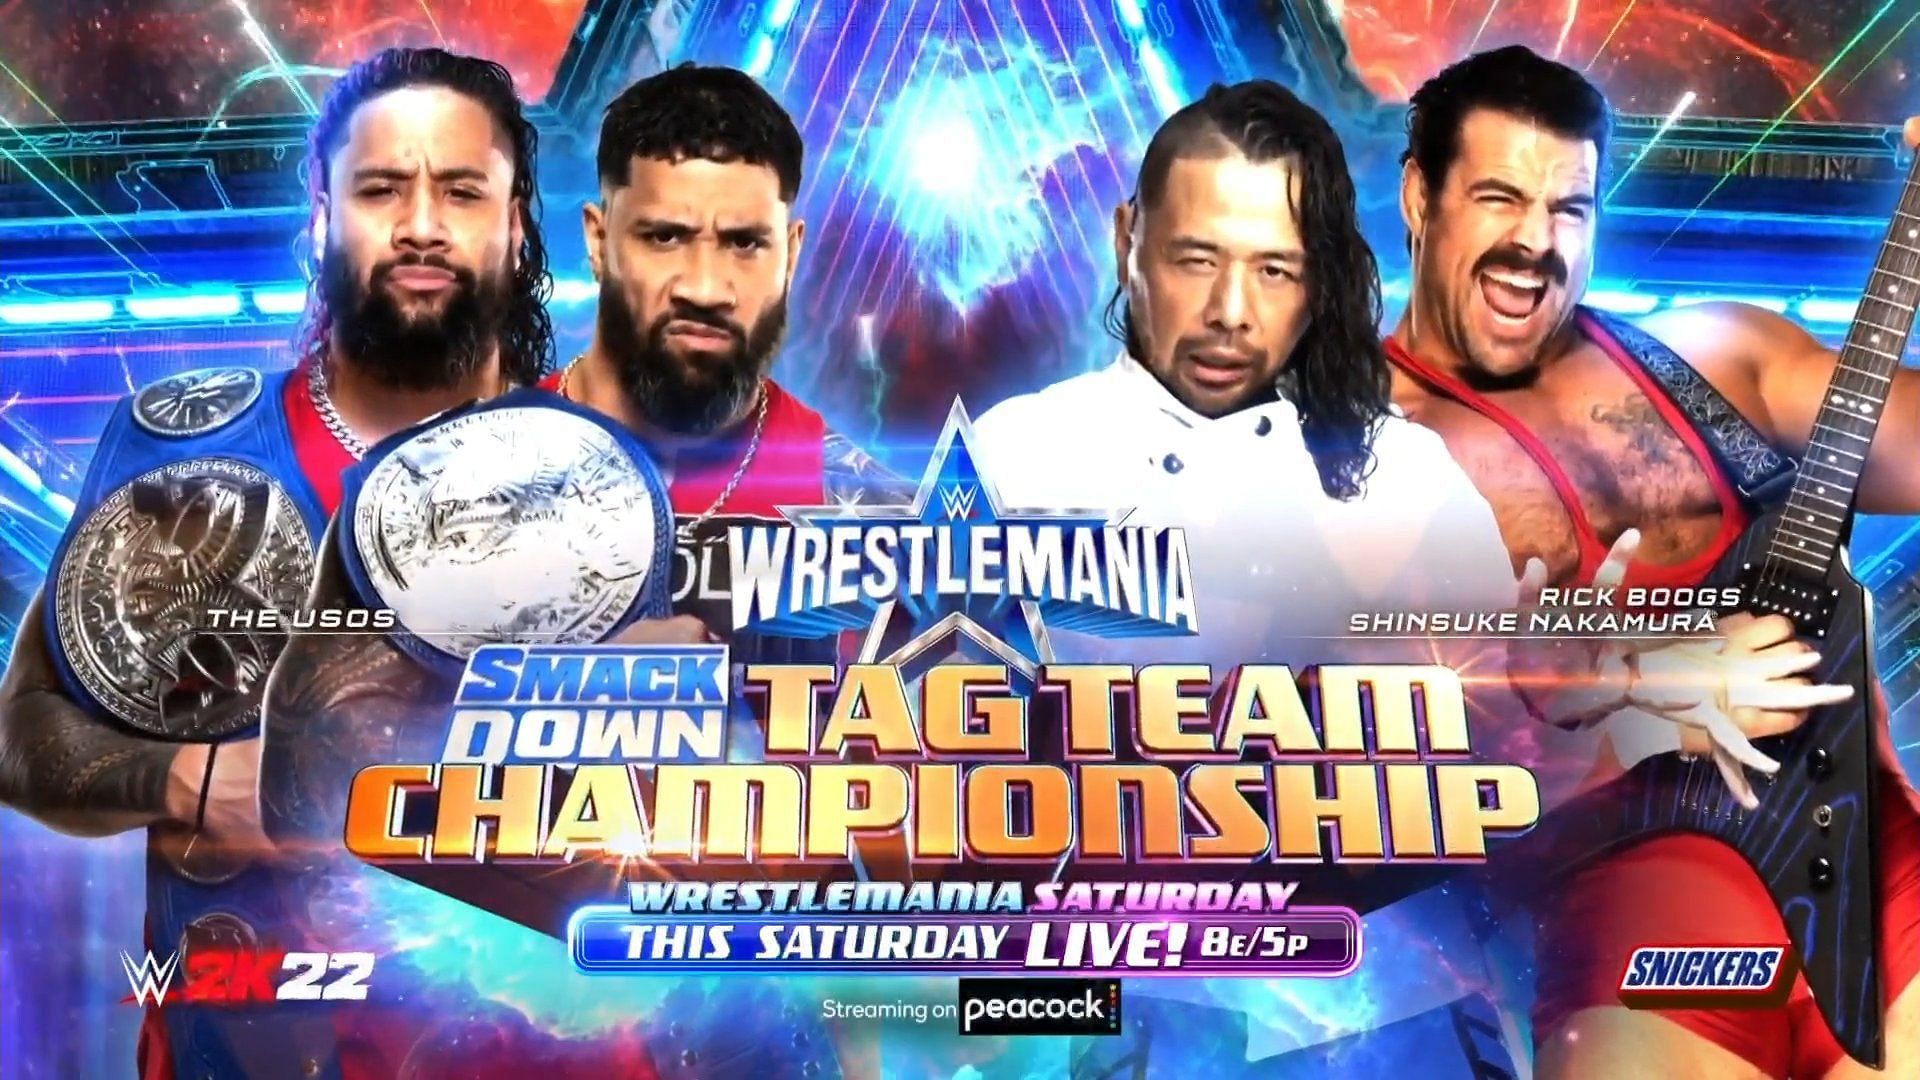 The WWE Smackdown Tag Team Championship will be on the line!